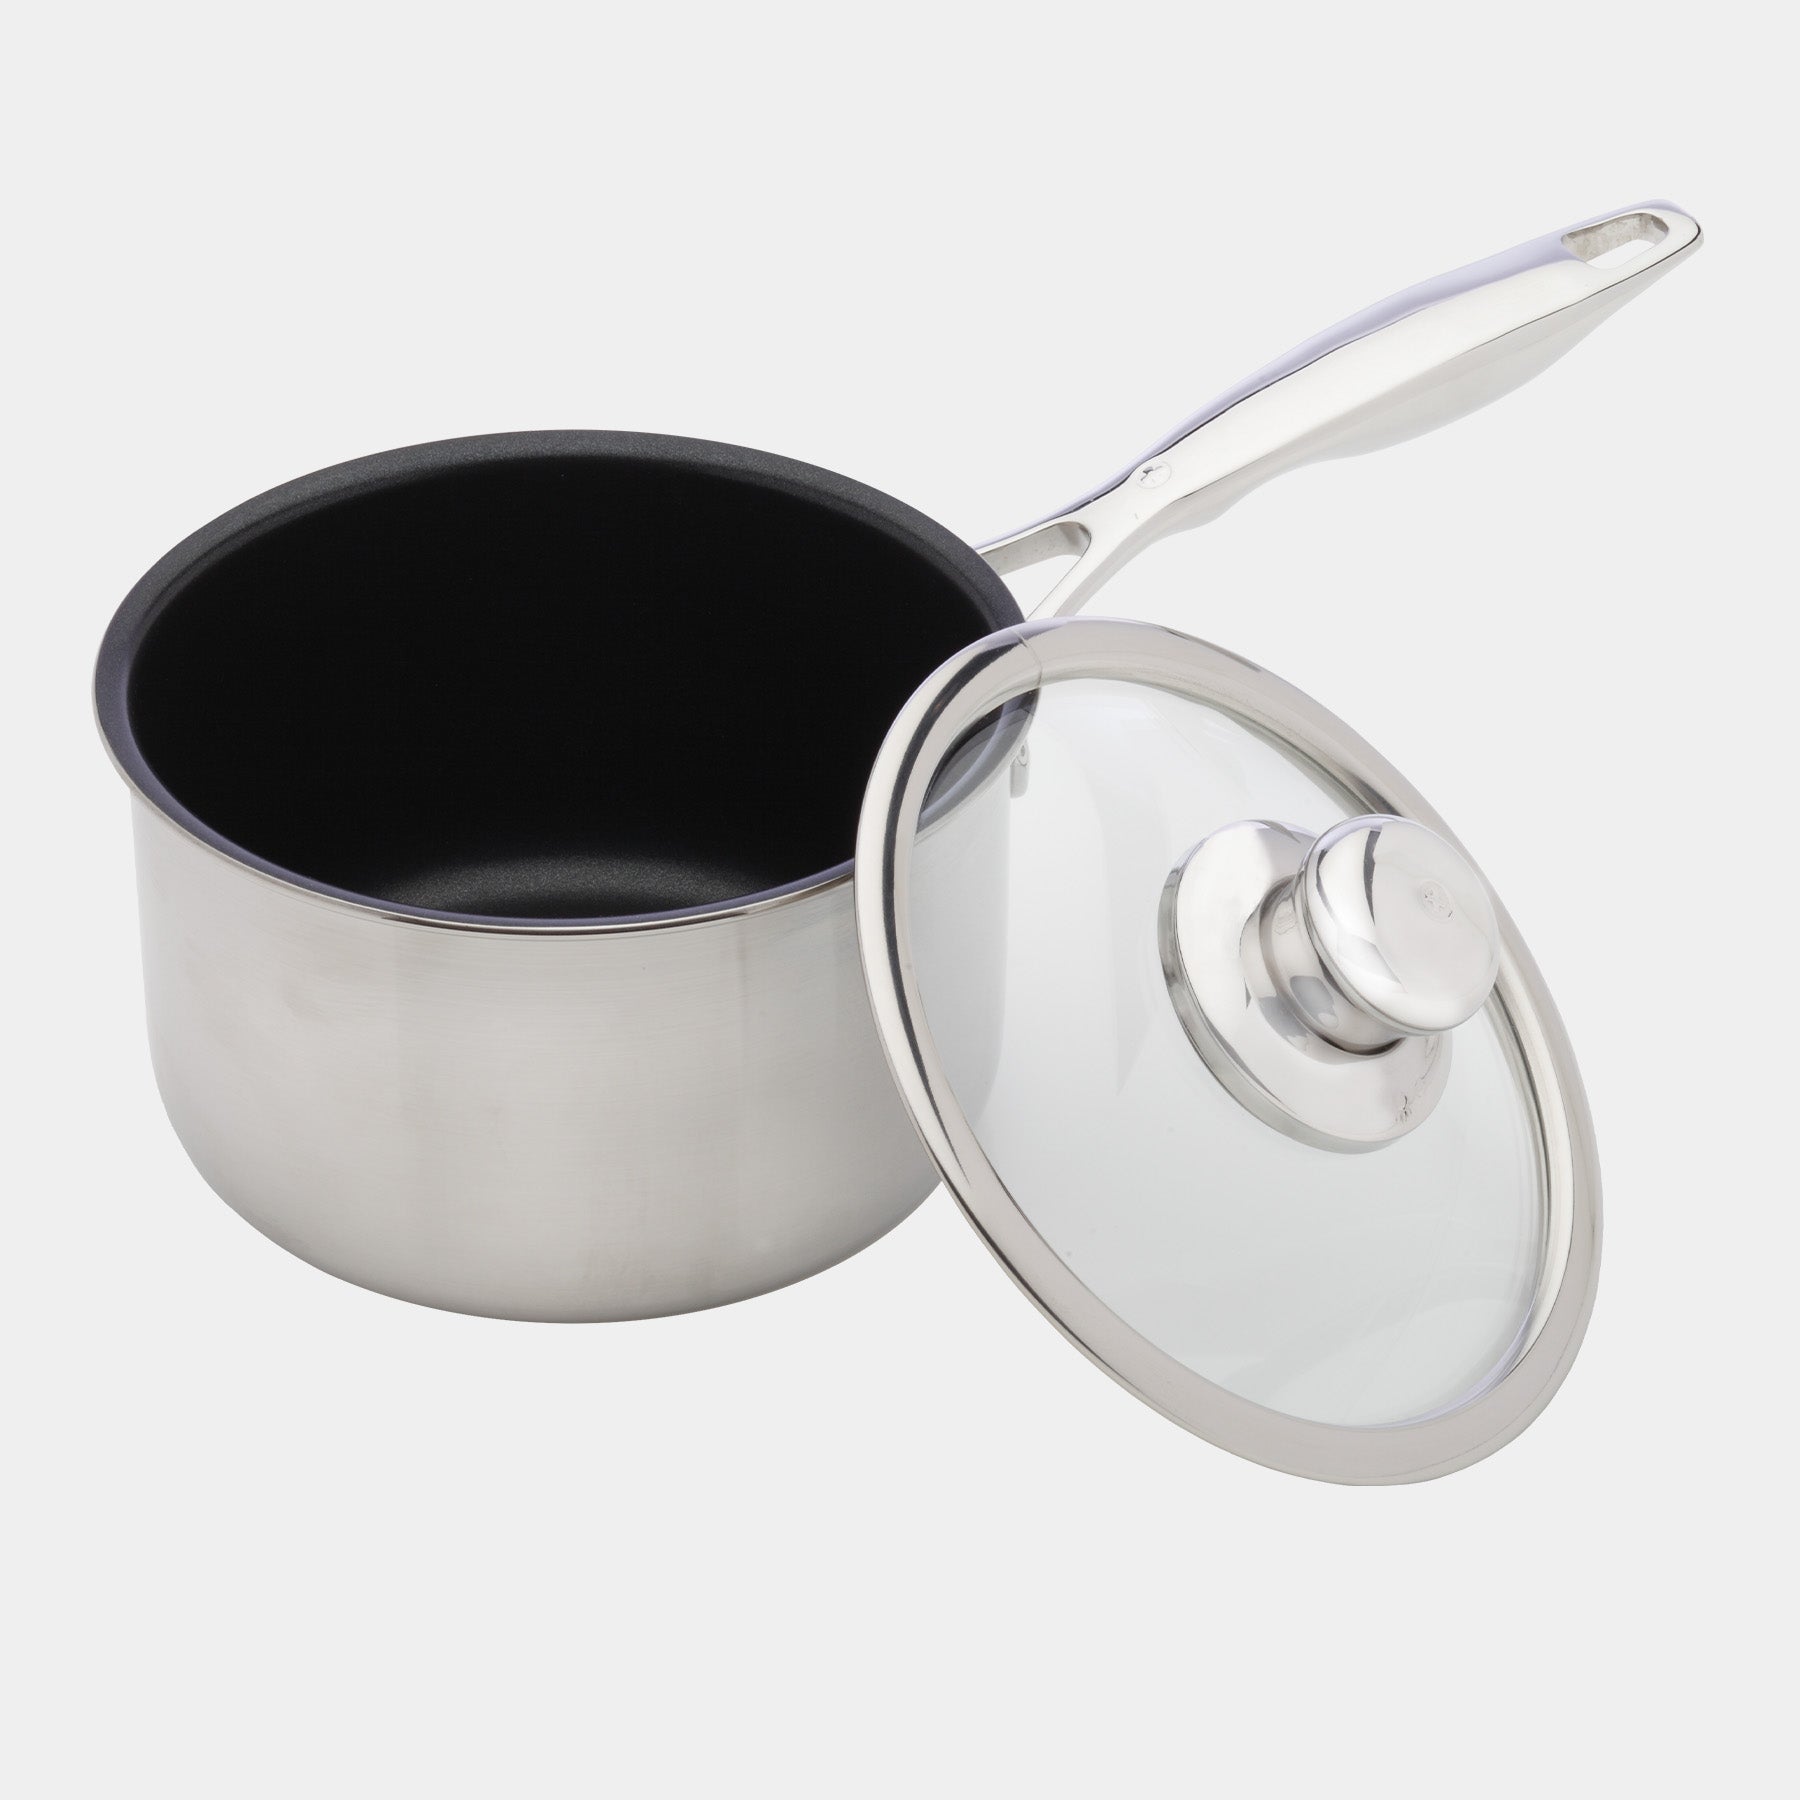 Nonstick Clad 2.1 qt Saucepan with Glass Lid - Induction